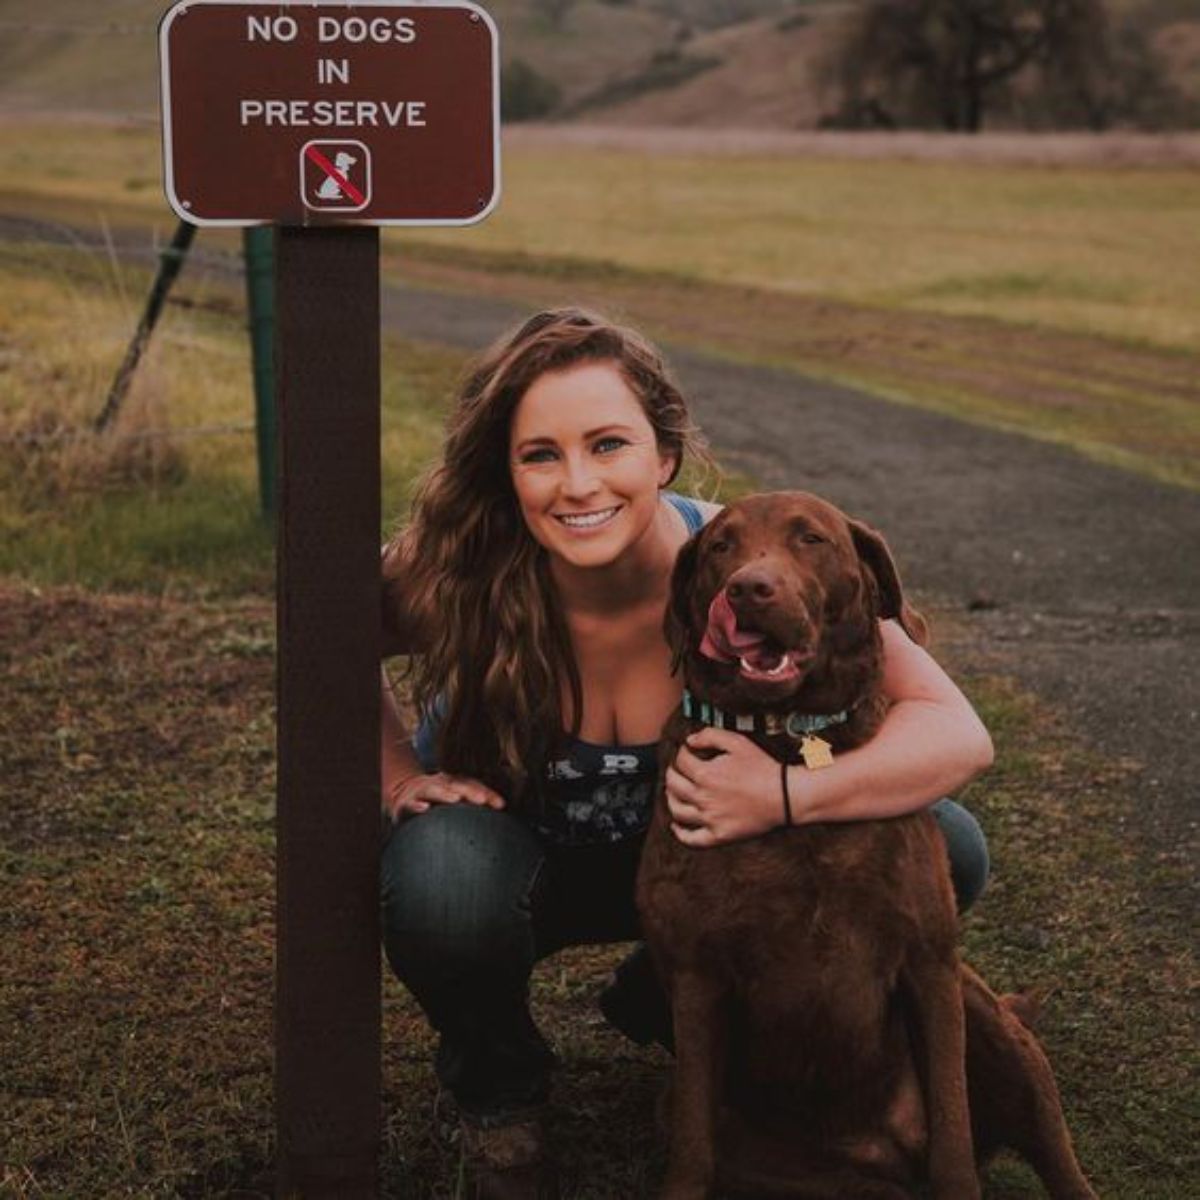 brown dog being hugged by a woman by a NO DOGS IN PRESERVE sign